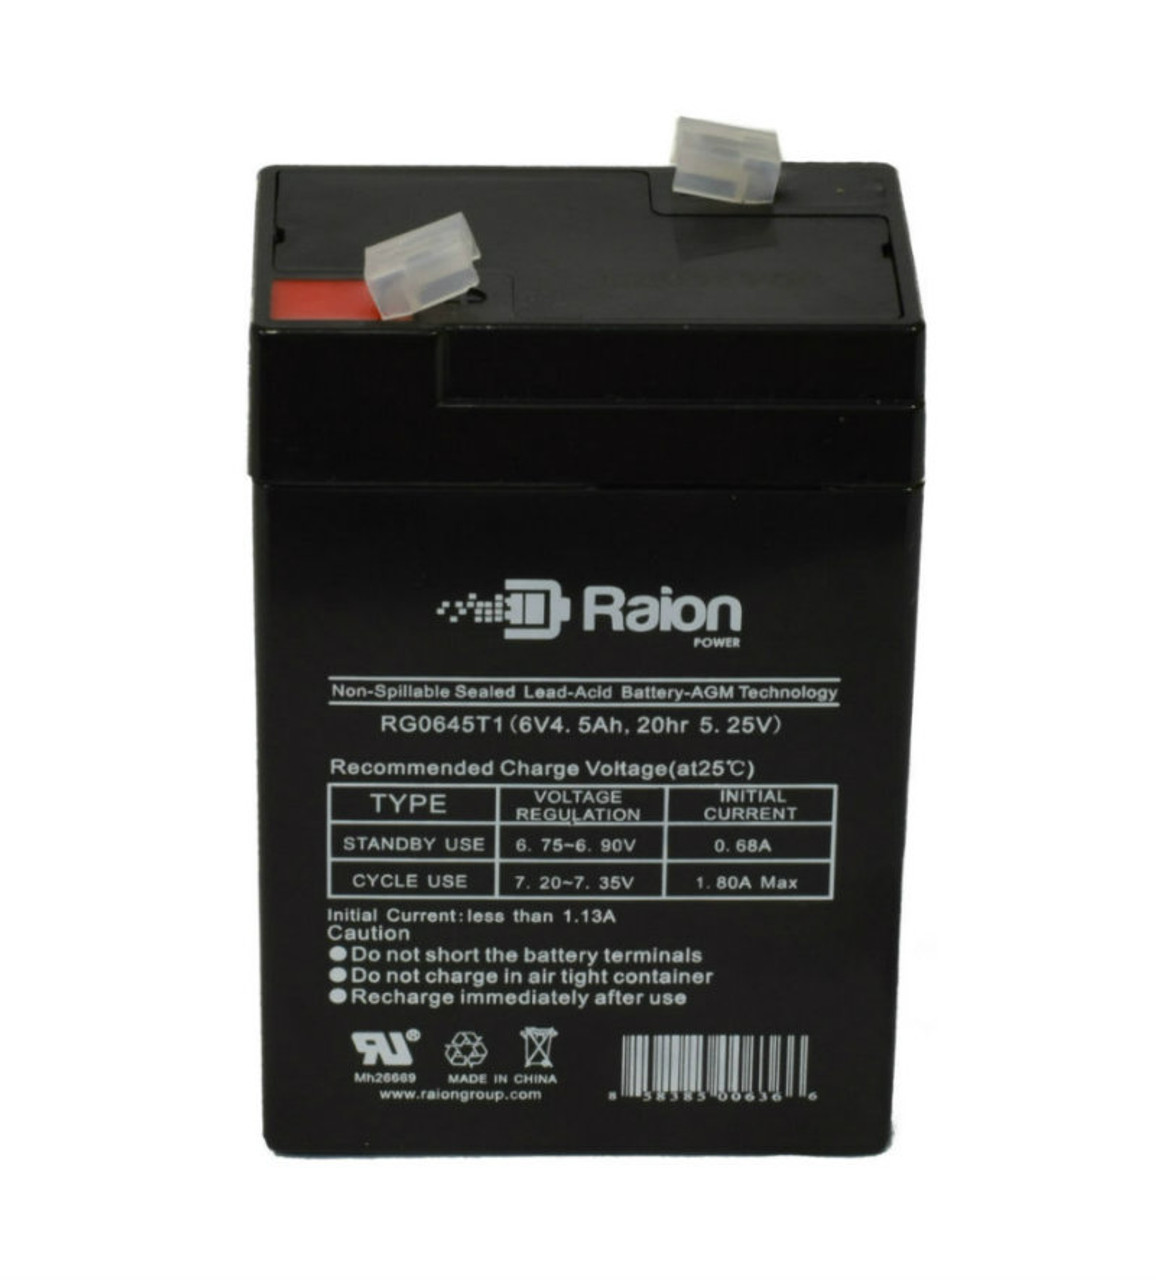 Raion Power RG0645T1 Replacement Battery Cartridge for Luxtec UltraLite Headlight System